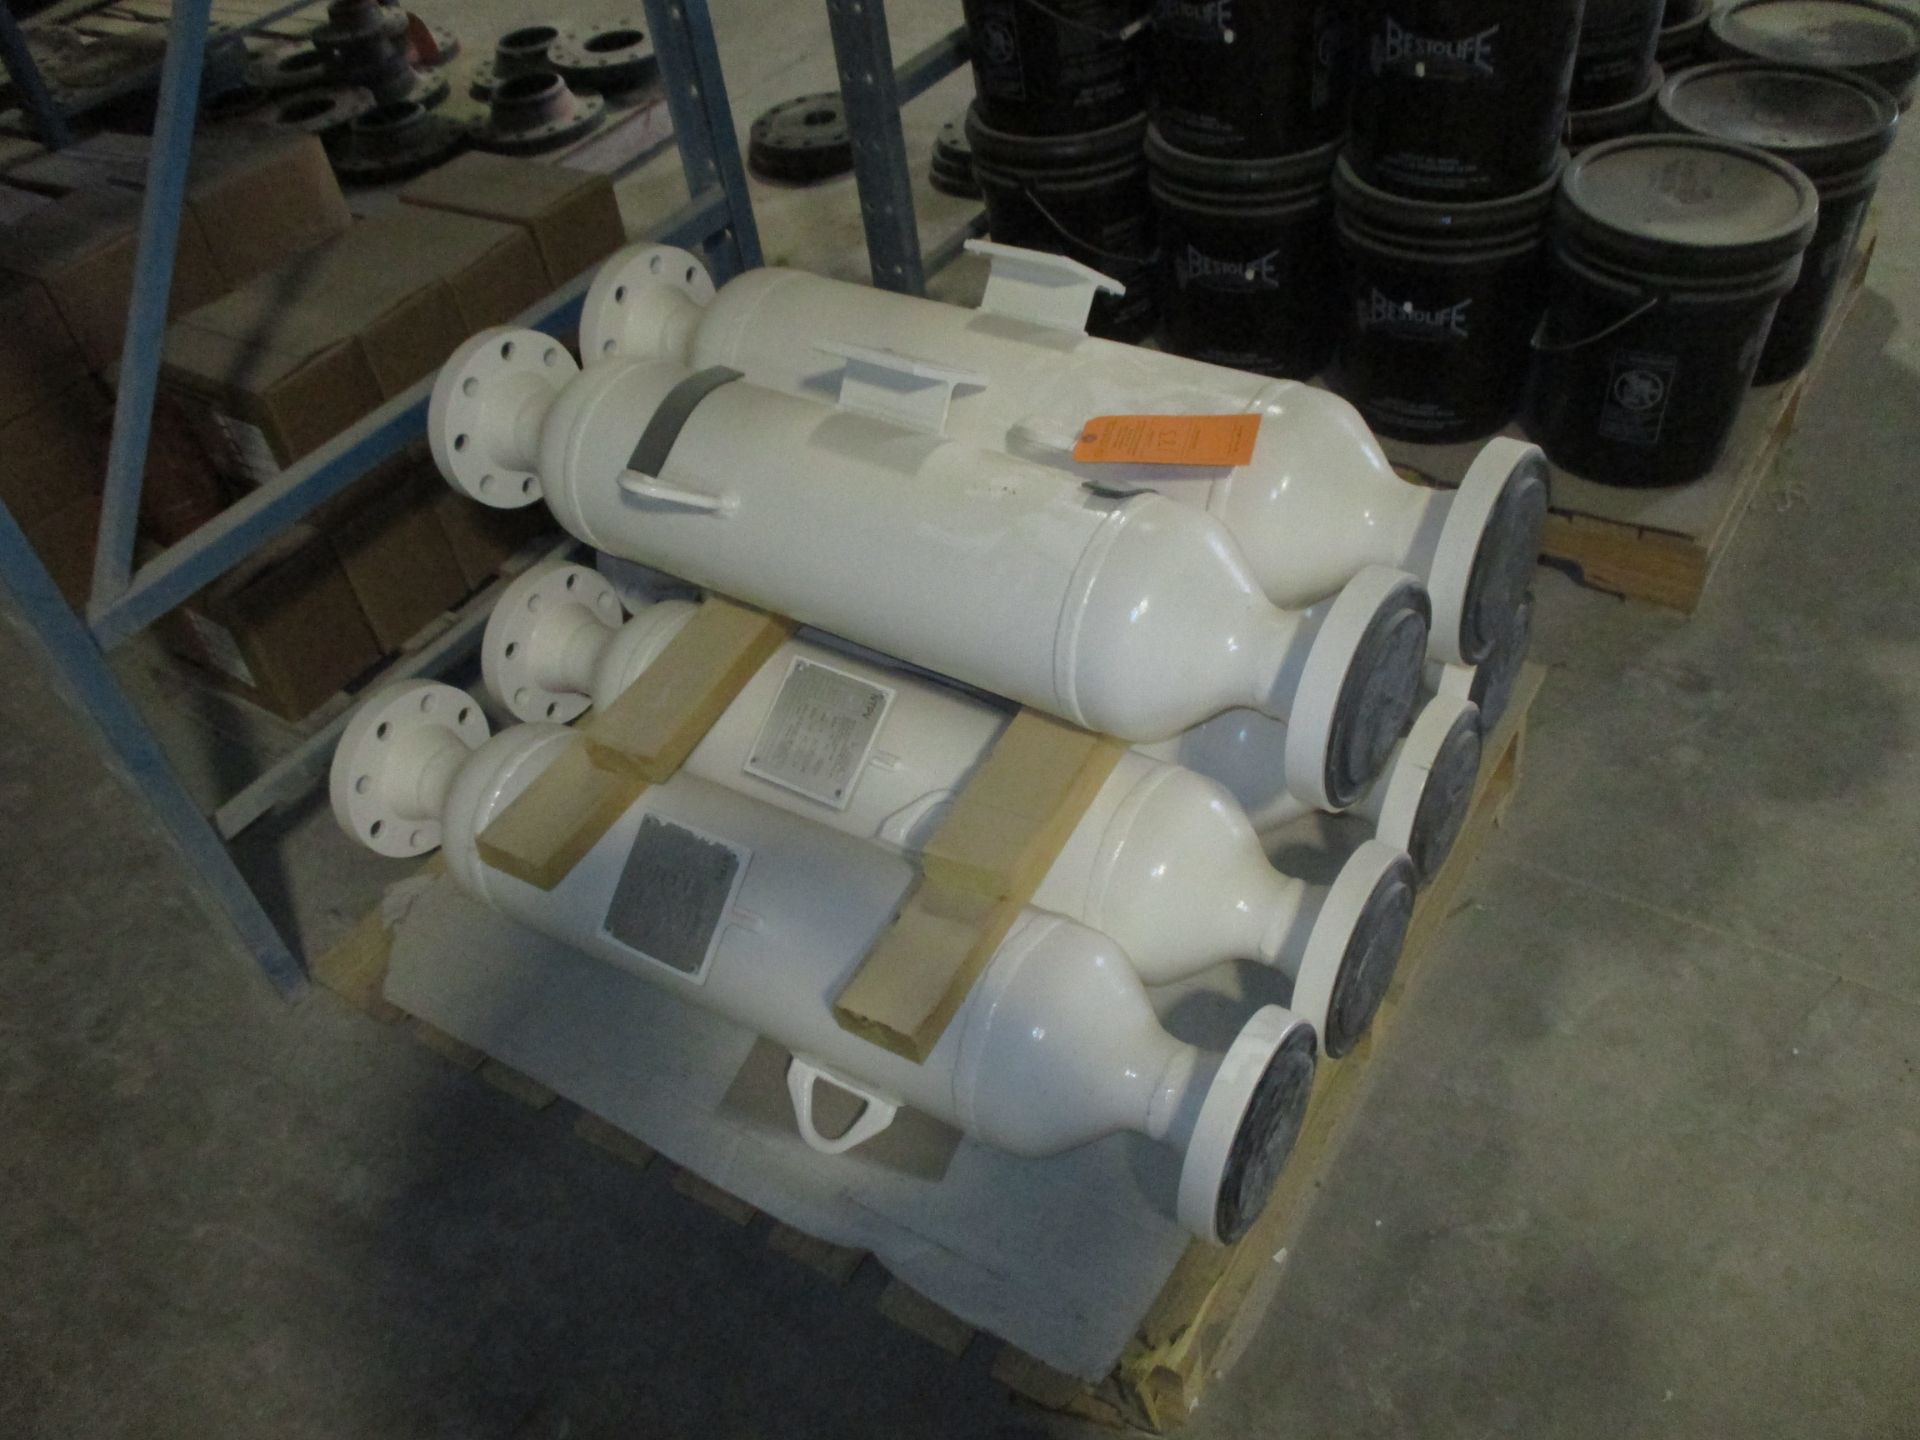 (6) NORTH TEXAS PRESSURE VESSELS; 1480 PSI/MAWP AT 100F; -20F/MDMT AT 1480 PSI; YR2015(LOCATED AT